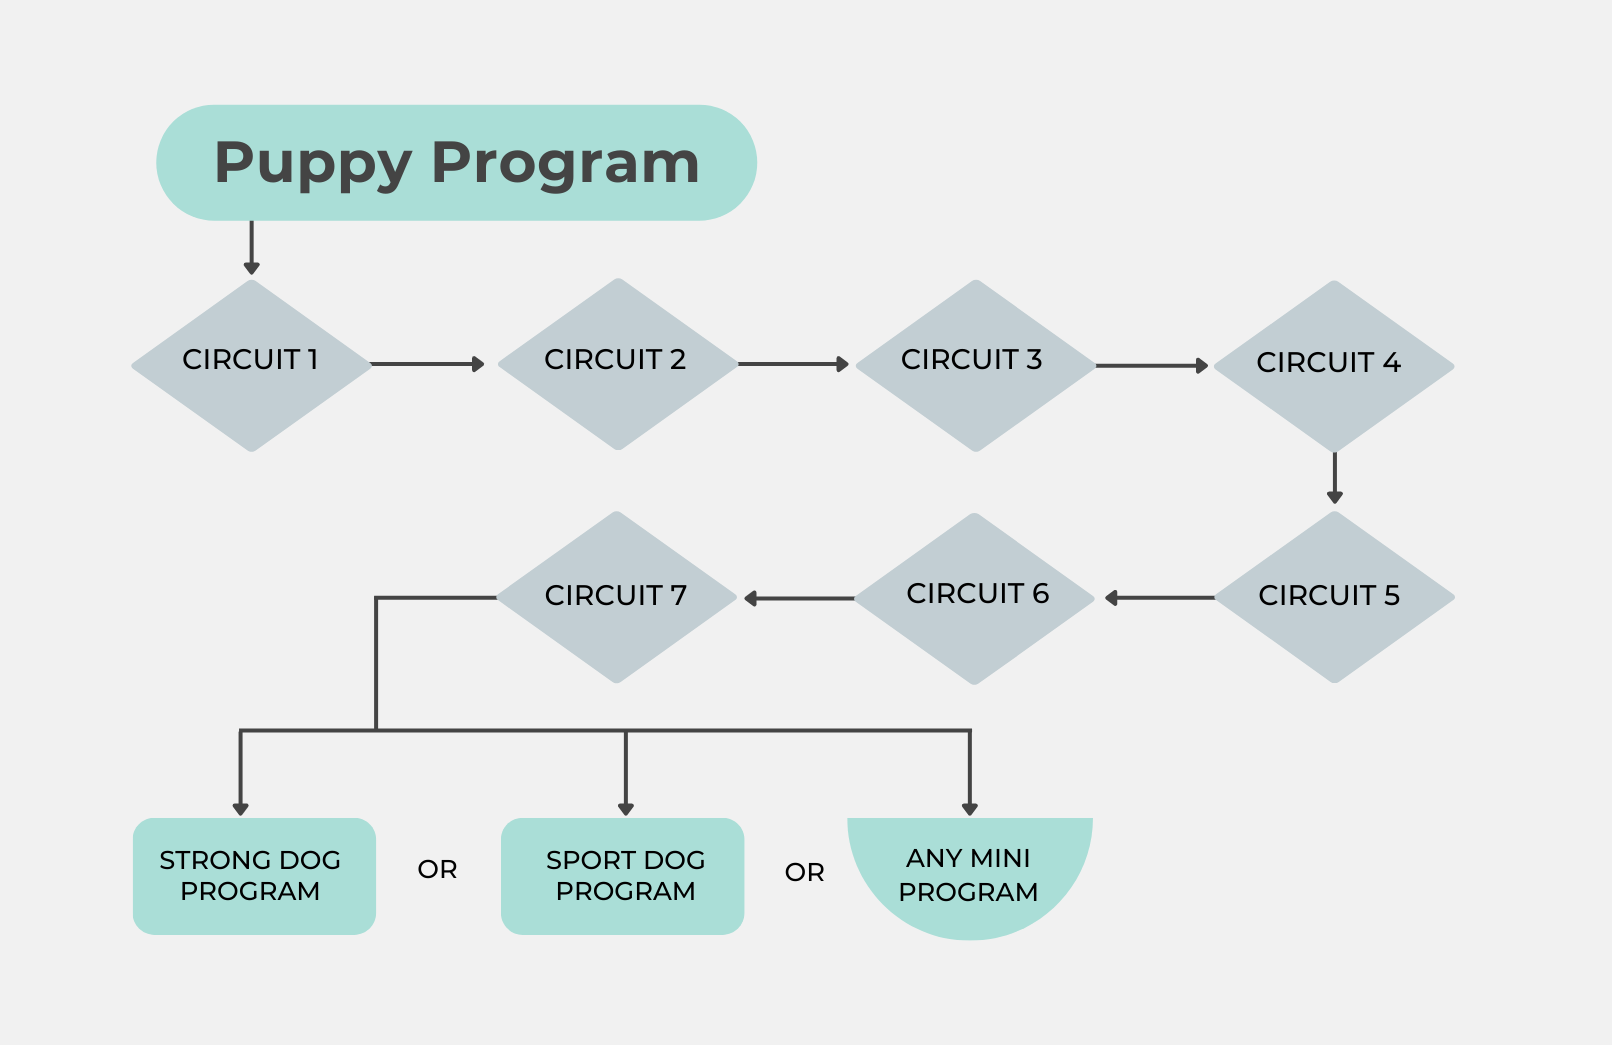 Map showing the path through the Puppy Program